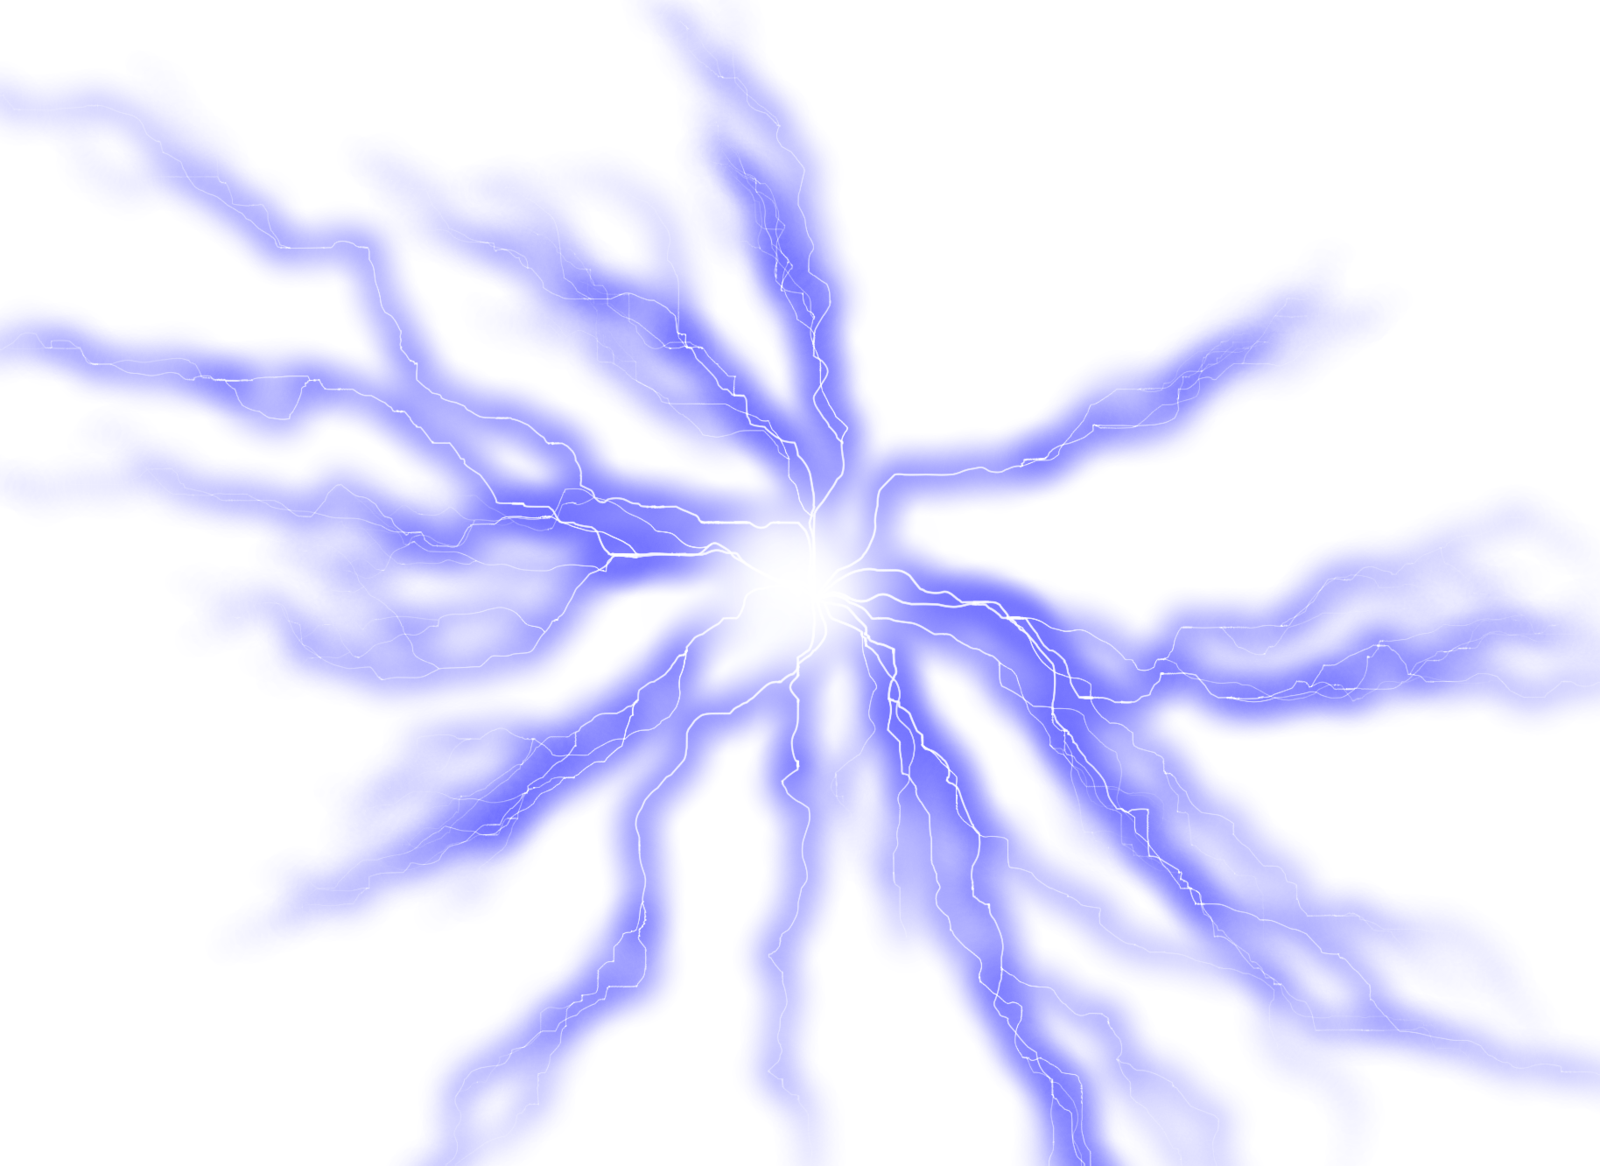 Thunderstorm PNG Free Image